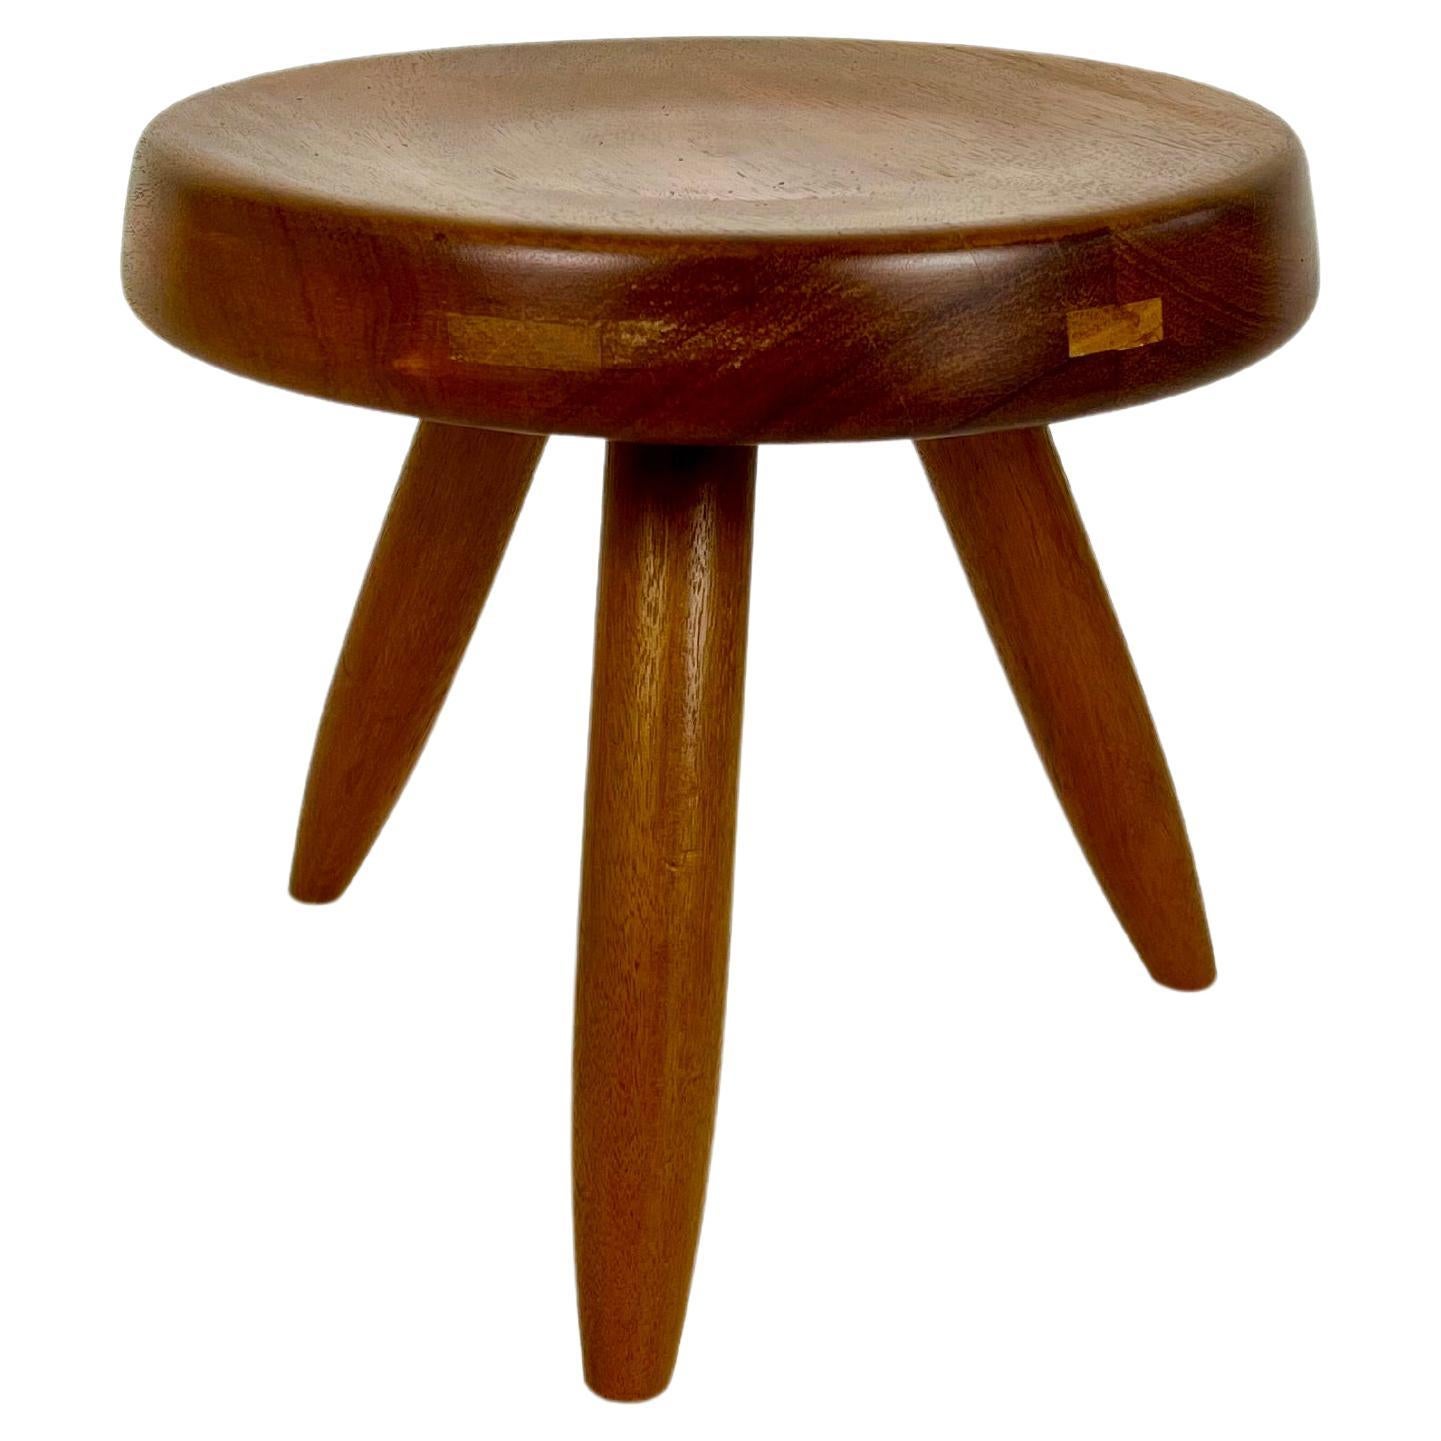 Berger low stool in mahogany, Charlotte Perriand